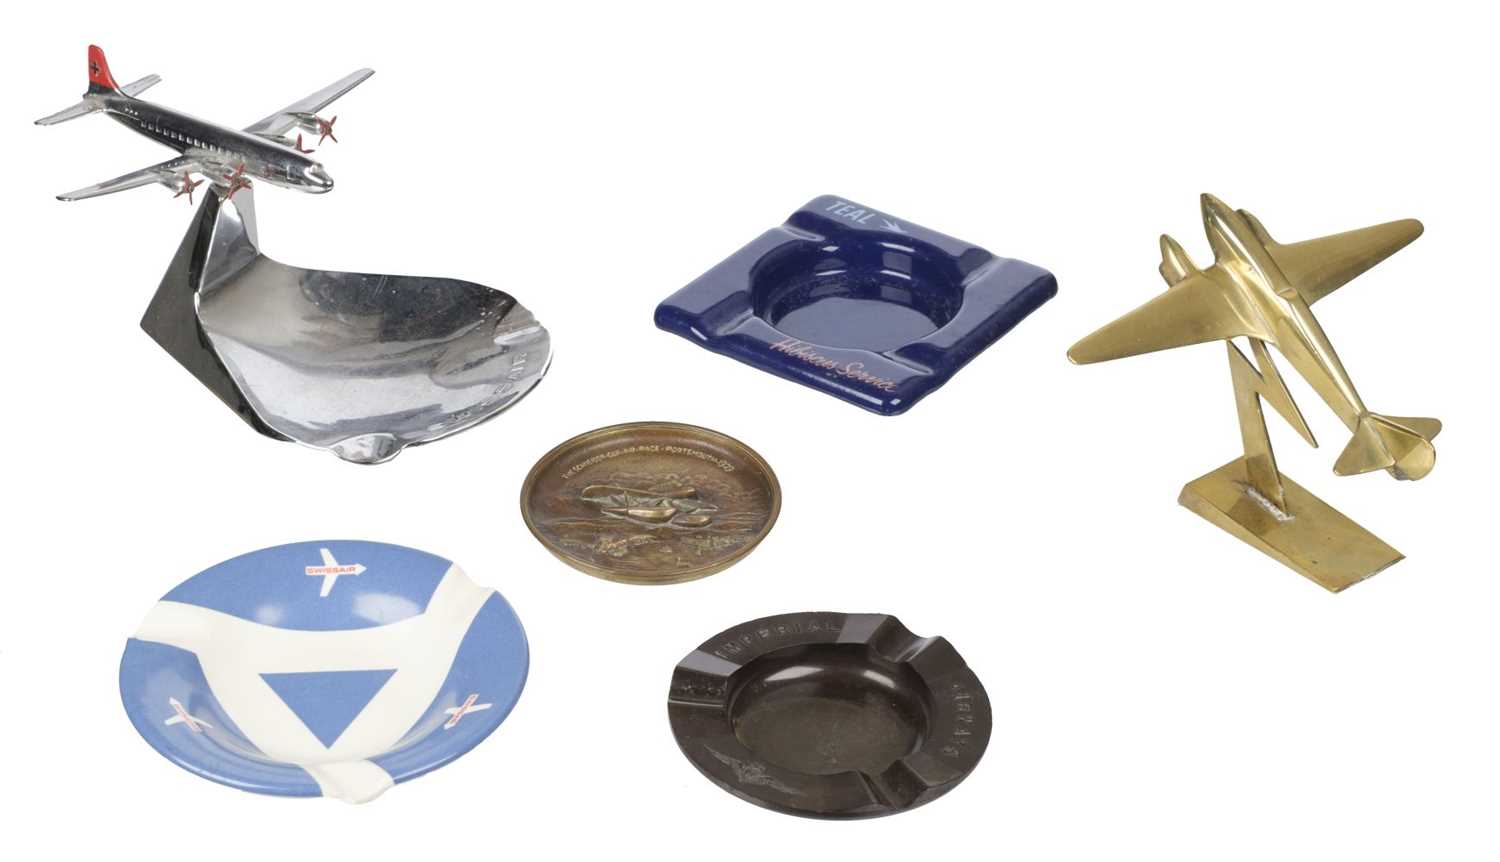 Lot 56 - Civil Aviation. A 1930s Imperial Airways Bakelite ashtray and related items